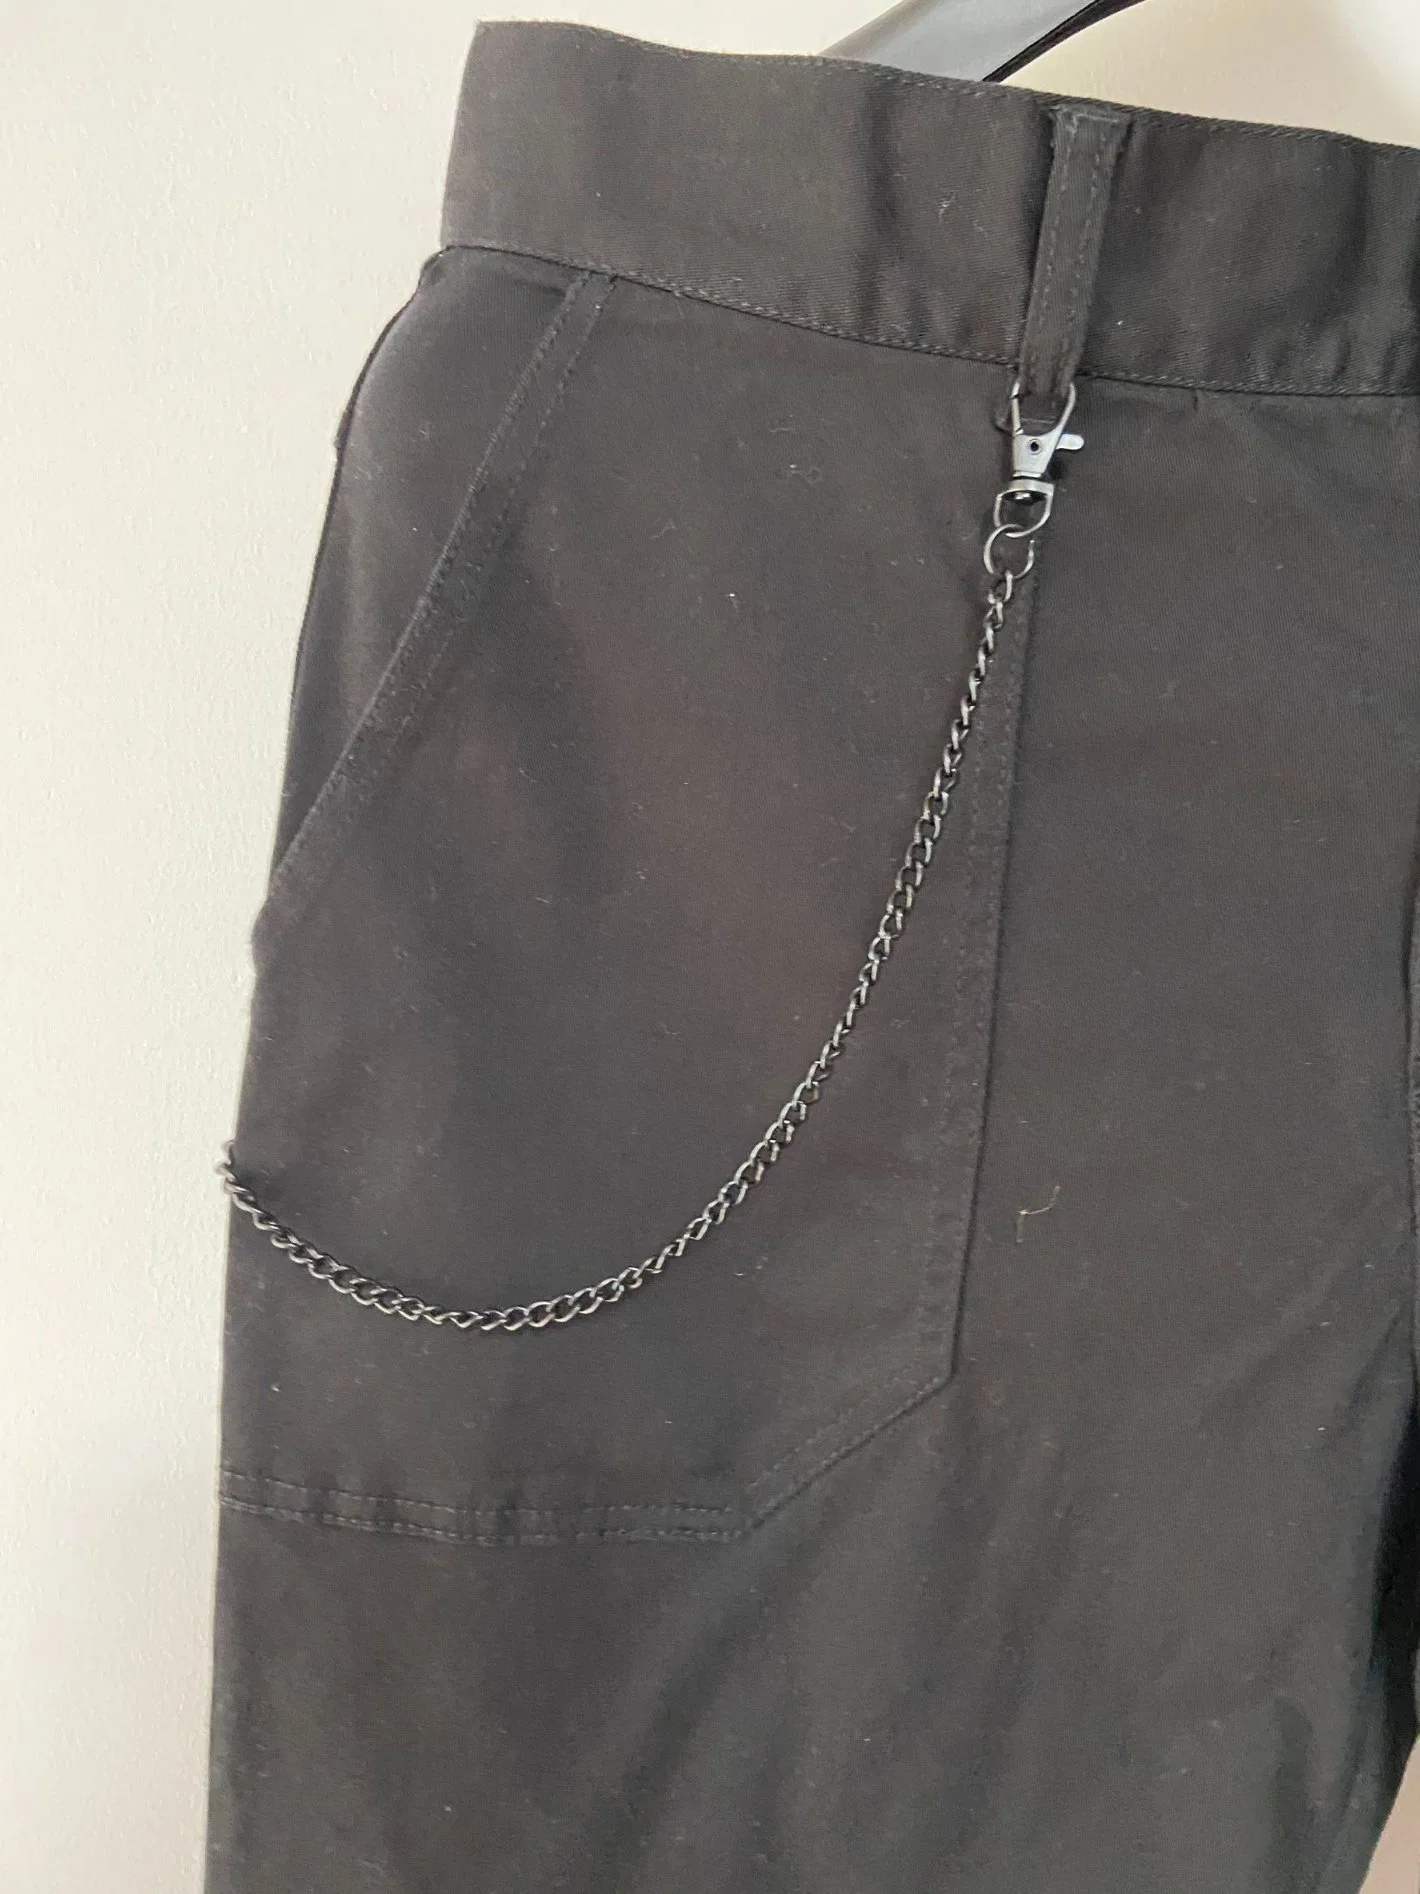 Mens Casual Pant or Trousers with Cotton/Spandex for European Sizes